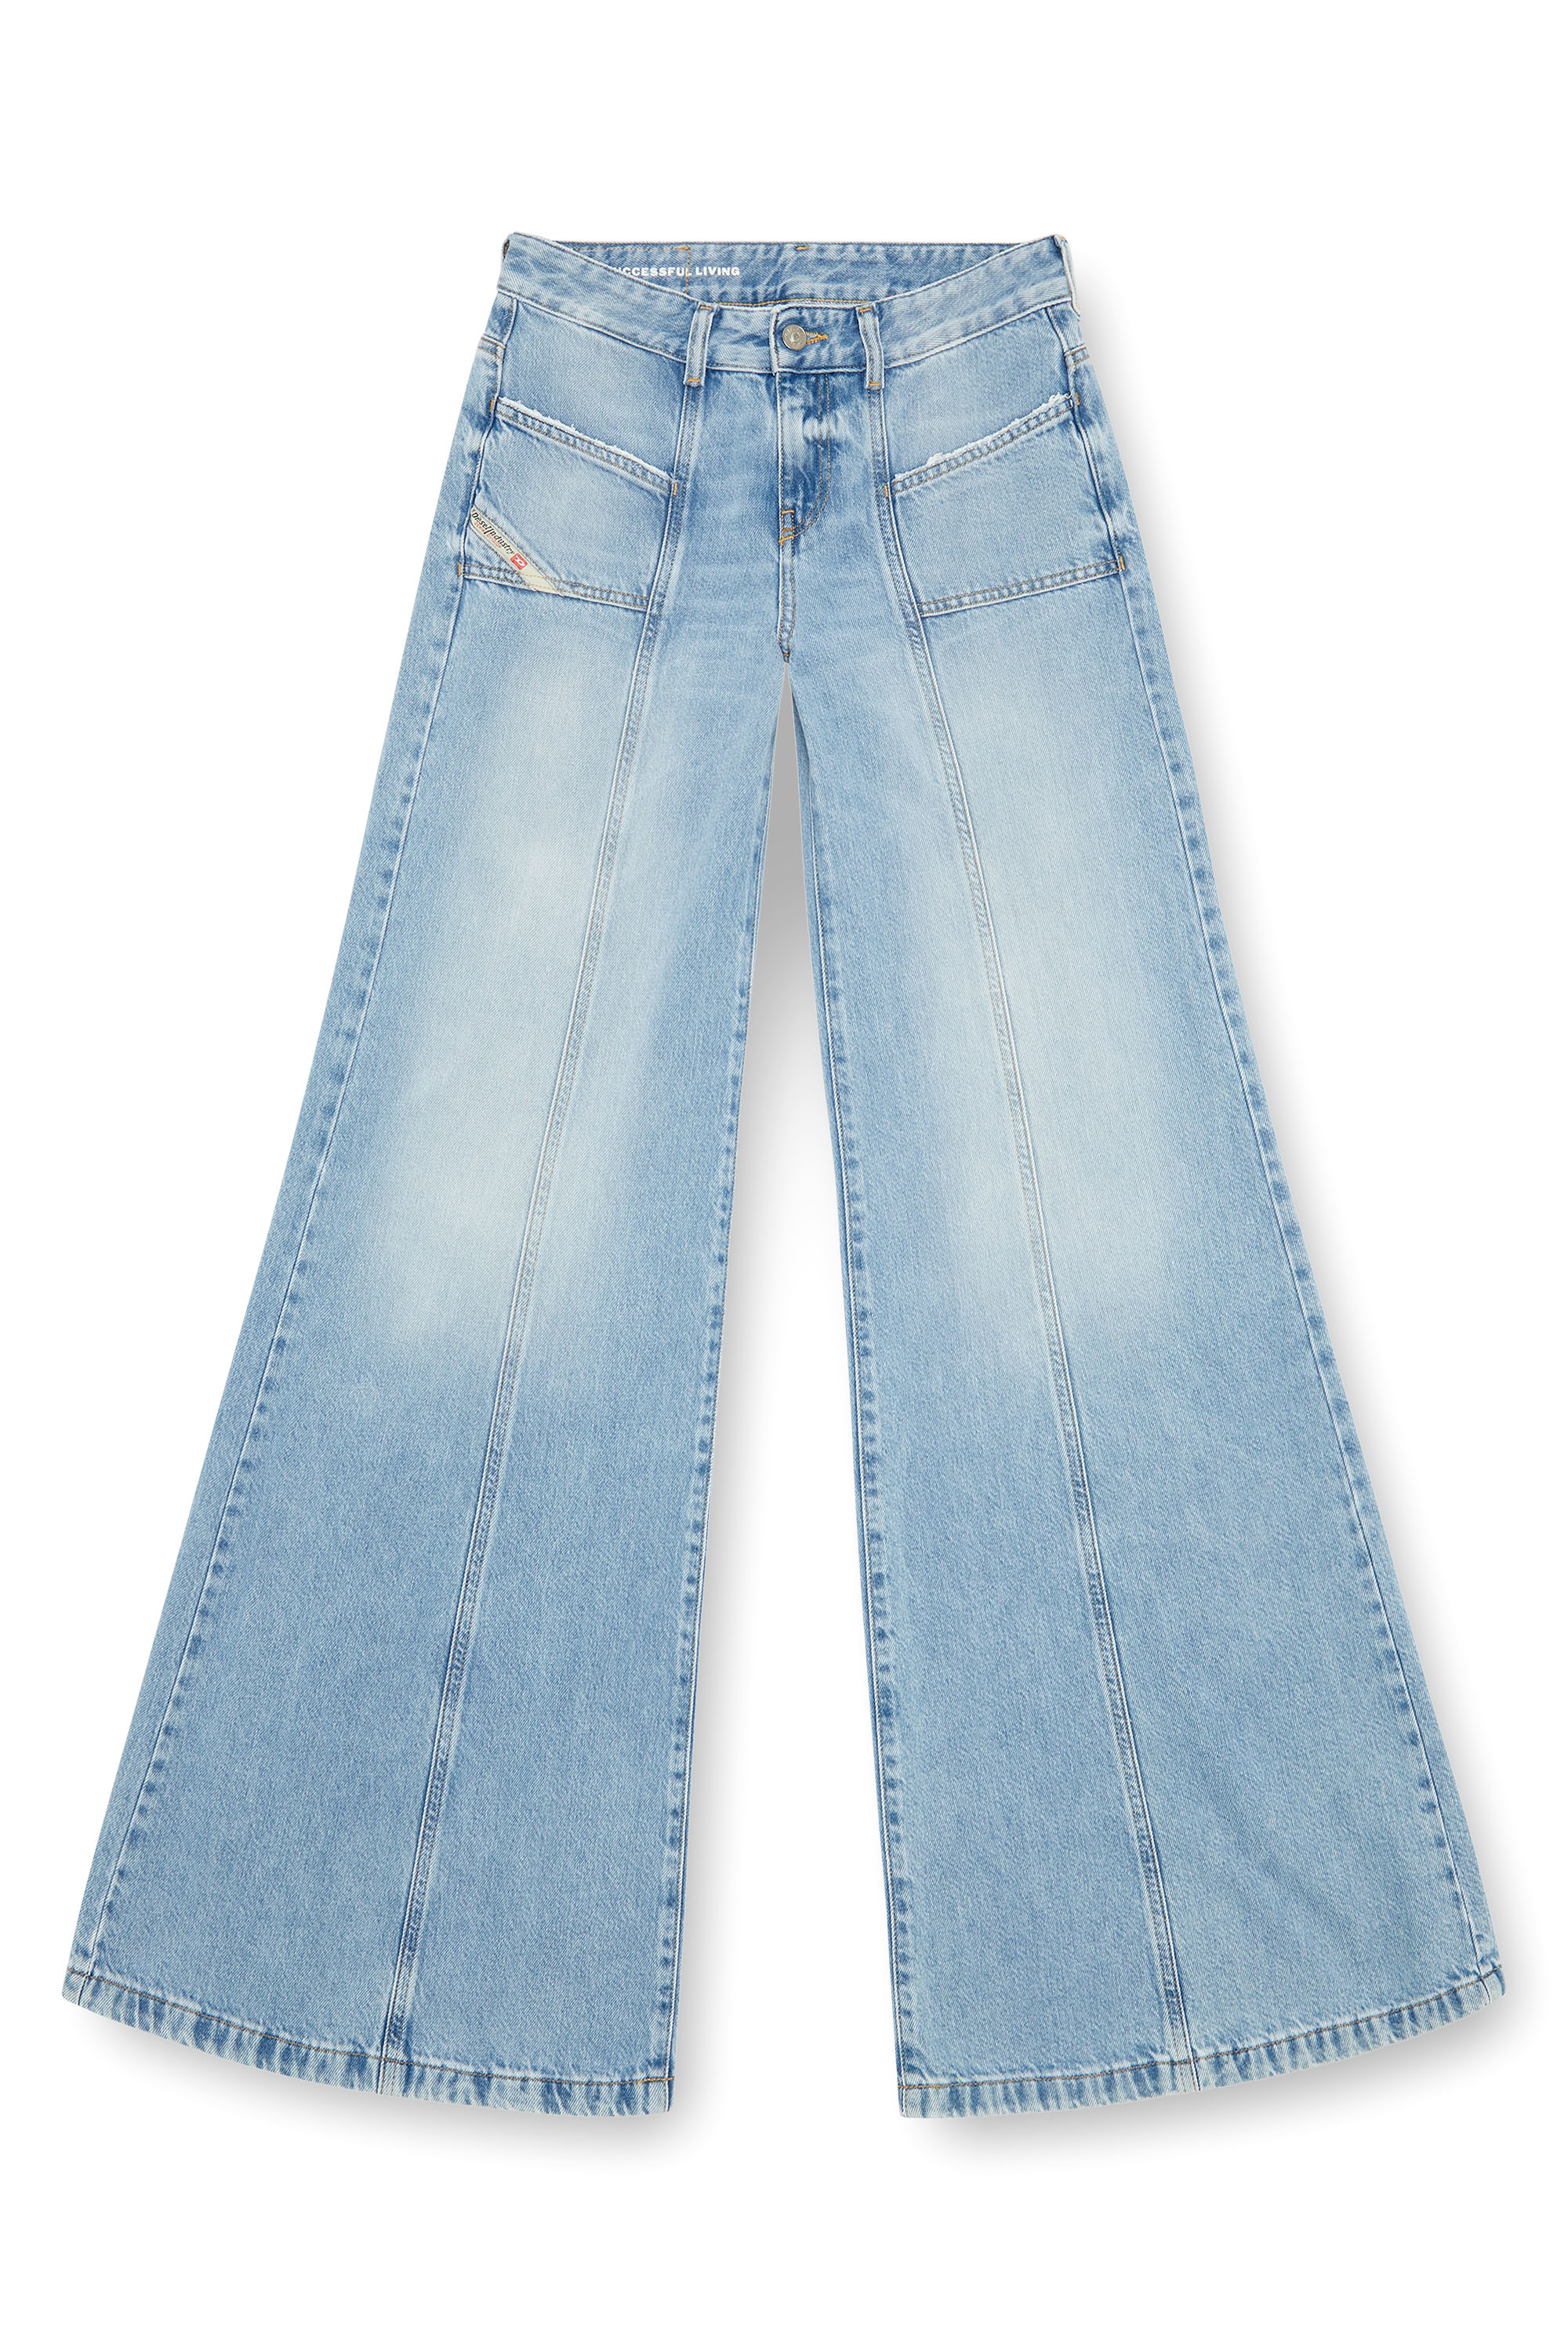 Diesel - Bootcut and Flare Jeans D-Akii 09J88, Mujer Bootcut y Flare Jeans - D-Akii in Azul marino - Image 5